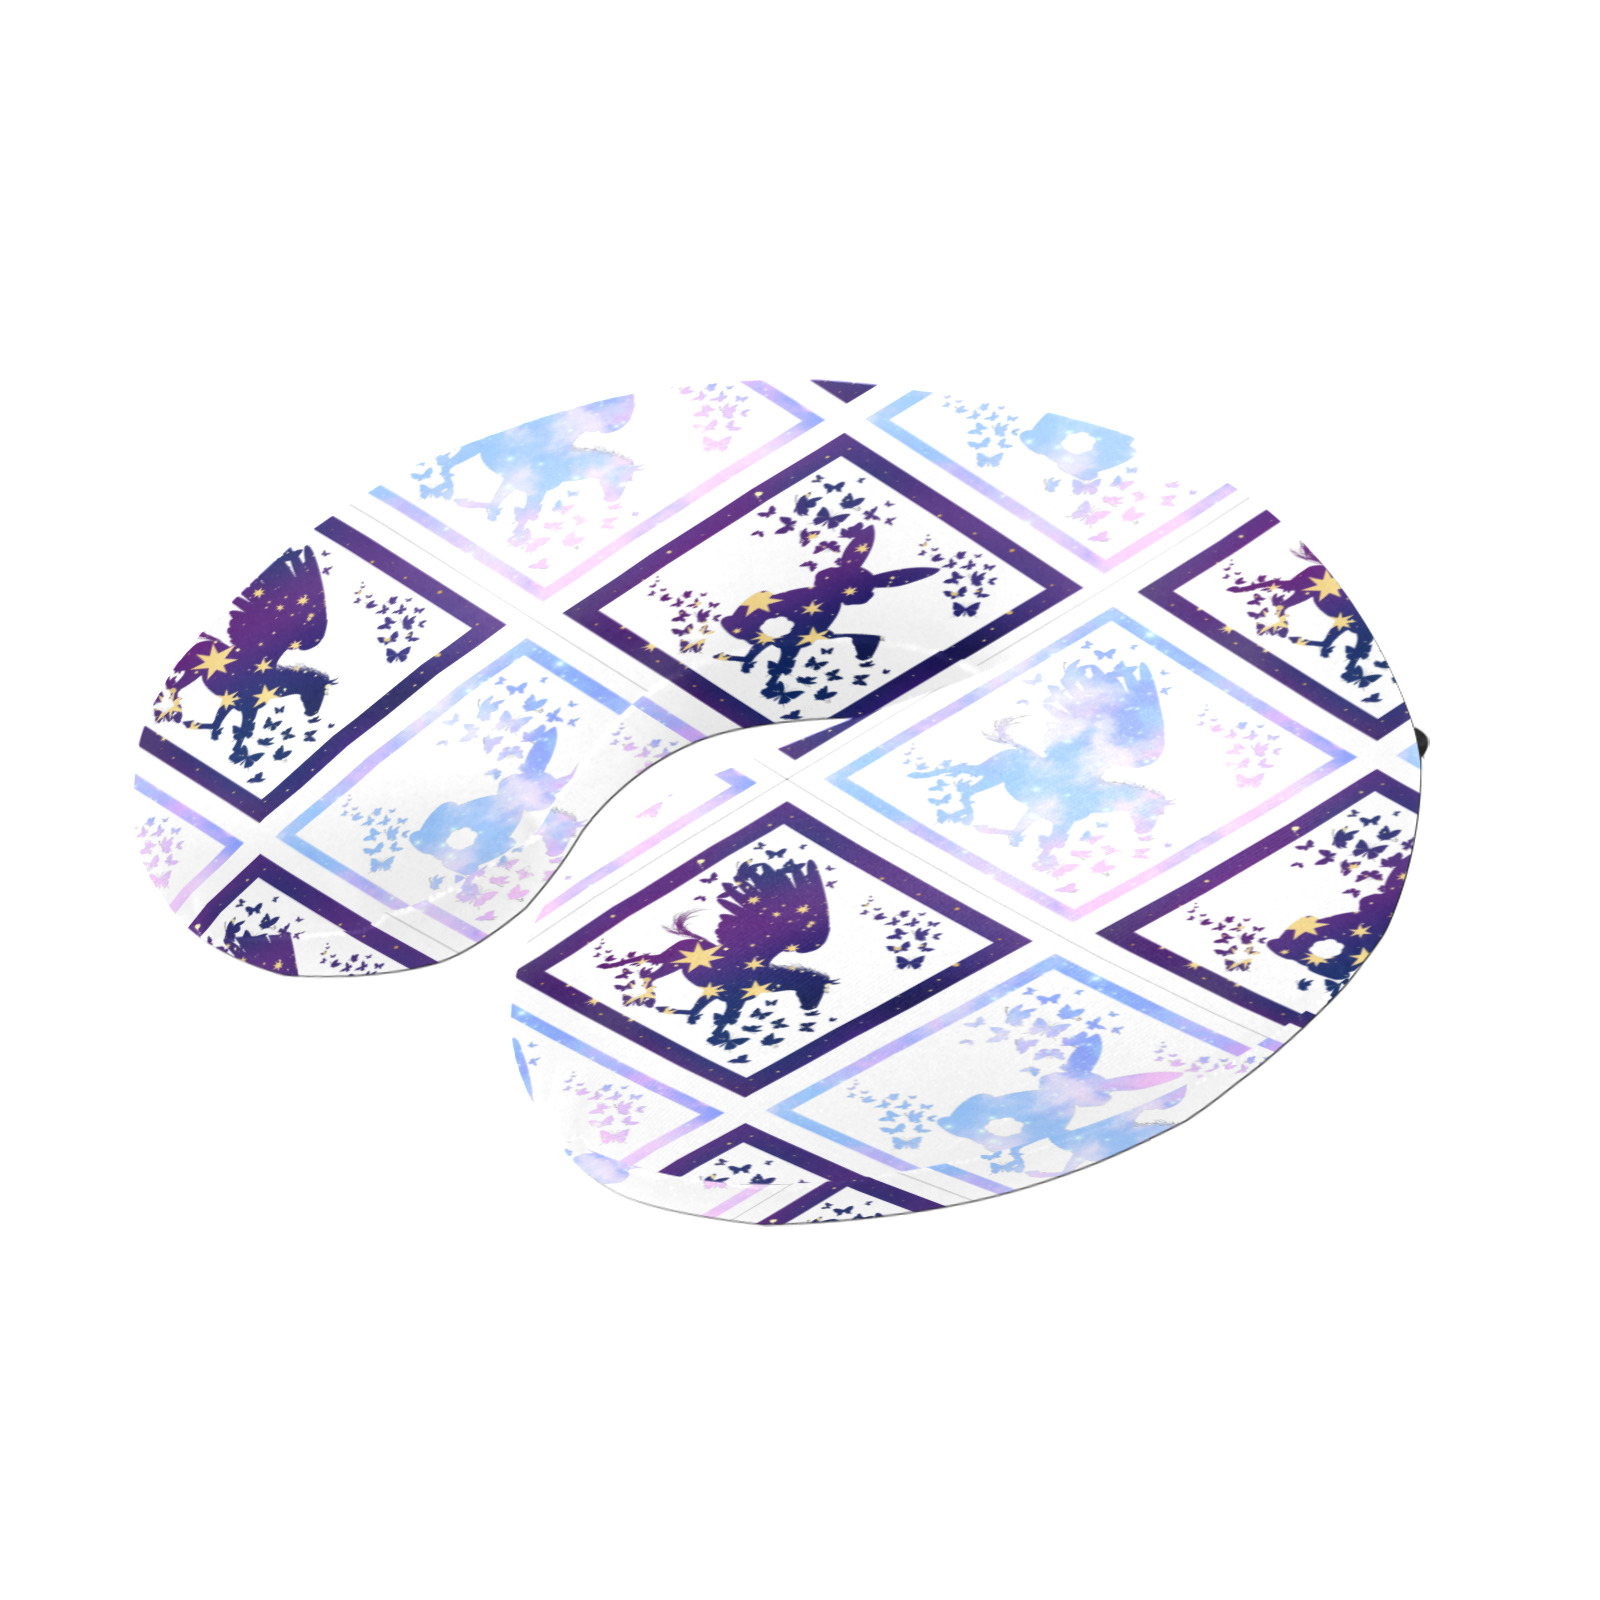 Bunny and Pegasus Together in Blue Patchwork Design U-Shape Travel Pillow